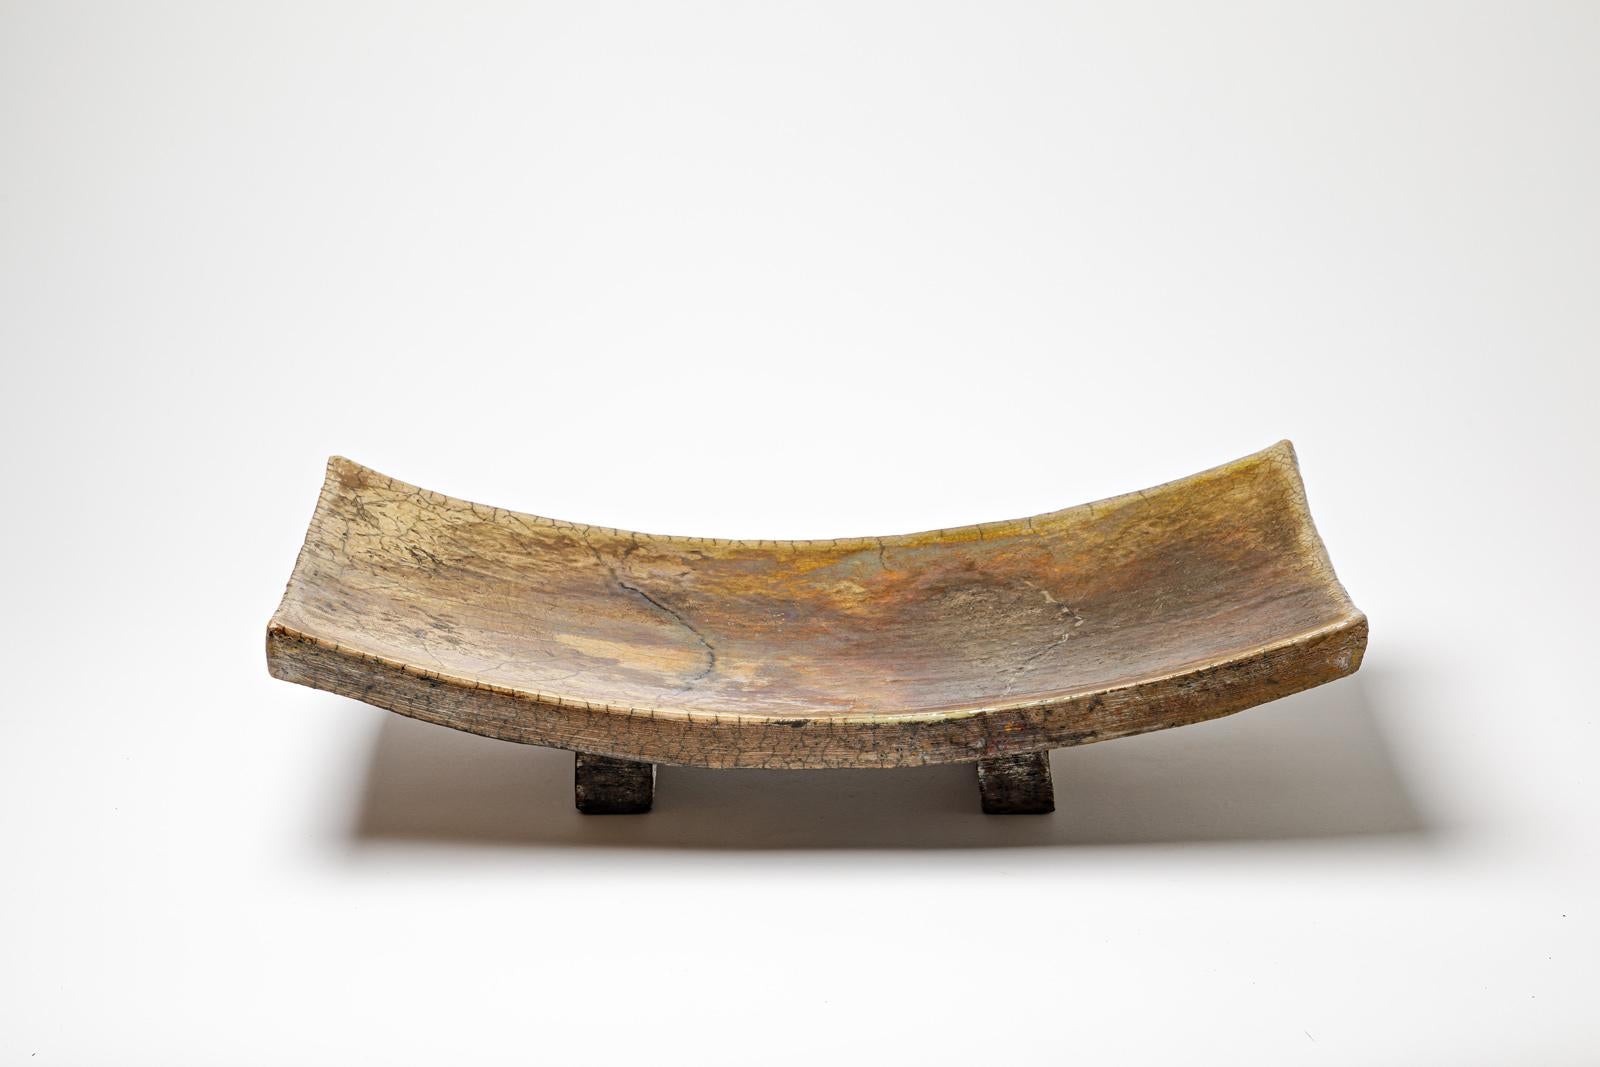 Large yellow and brown glazed ceramic cup by Gisèle Buthod Garçon. 
Raku fired. 
Artist monogram under the base. 
Circa 1980-1990.
H : 4.9’ x 10.6’ x 20.1’ inches.
